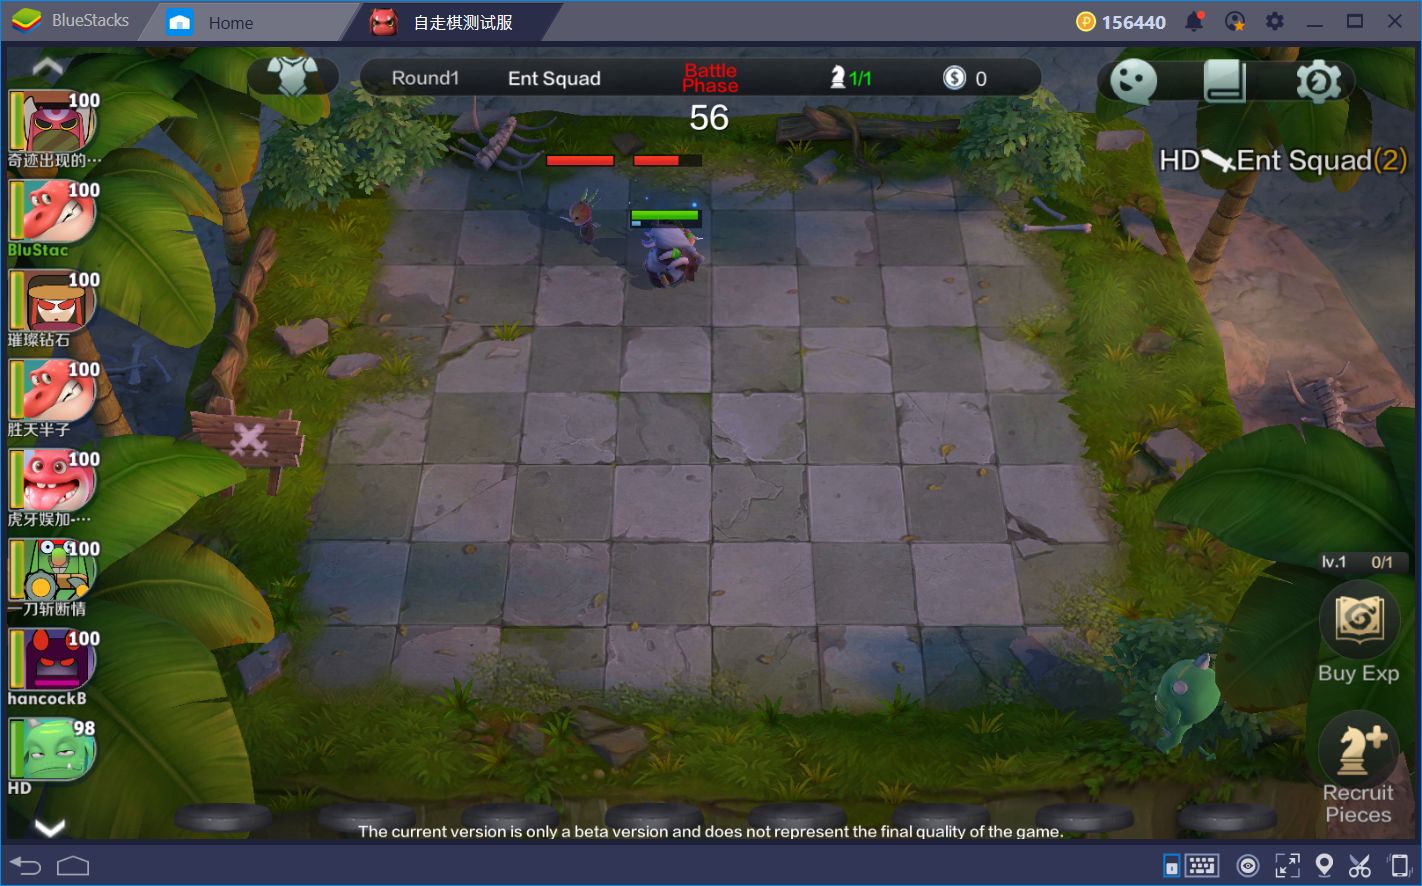 Auto Chess - The Popular Dota Custom Map, But on Your Mobile Device